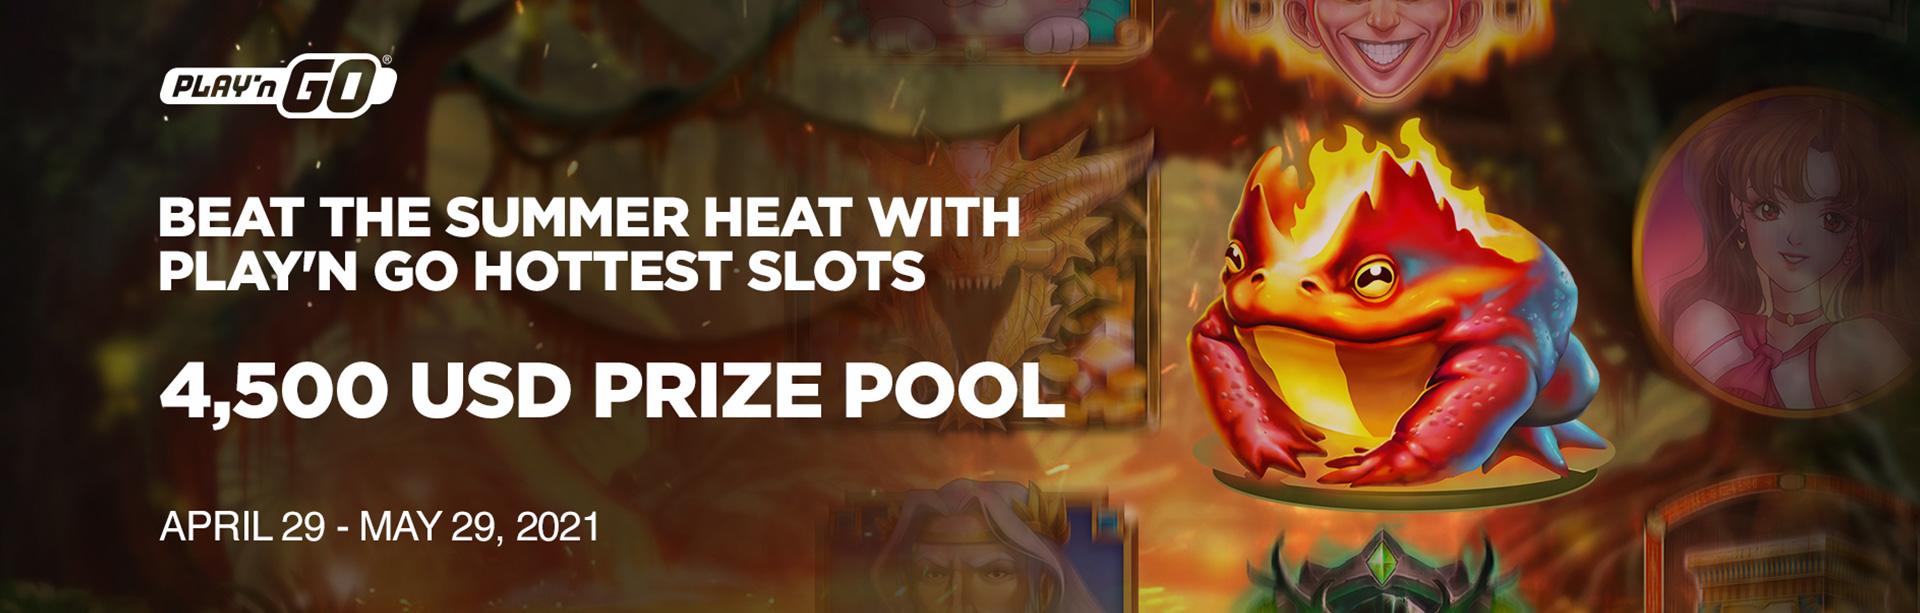 Beat the summer heat with our hottest slots!